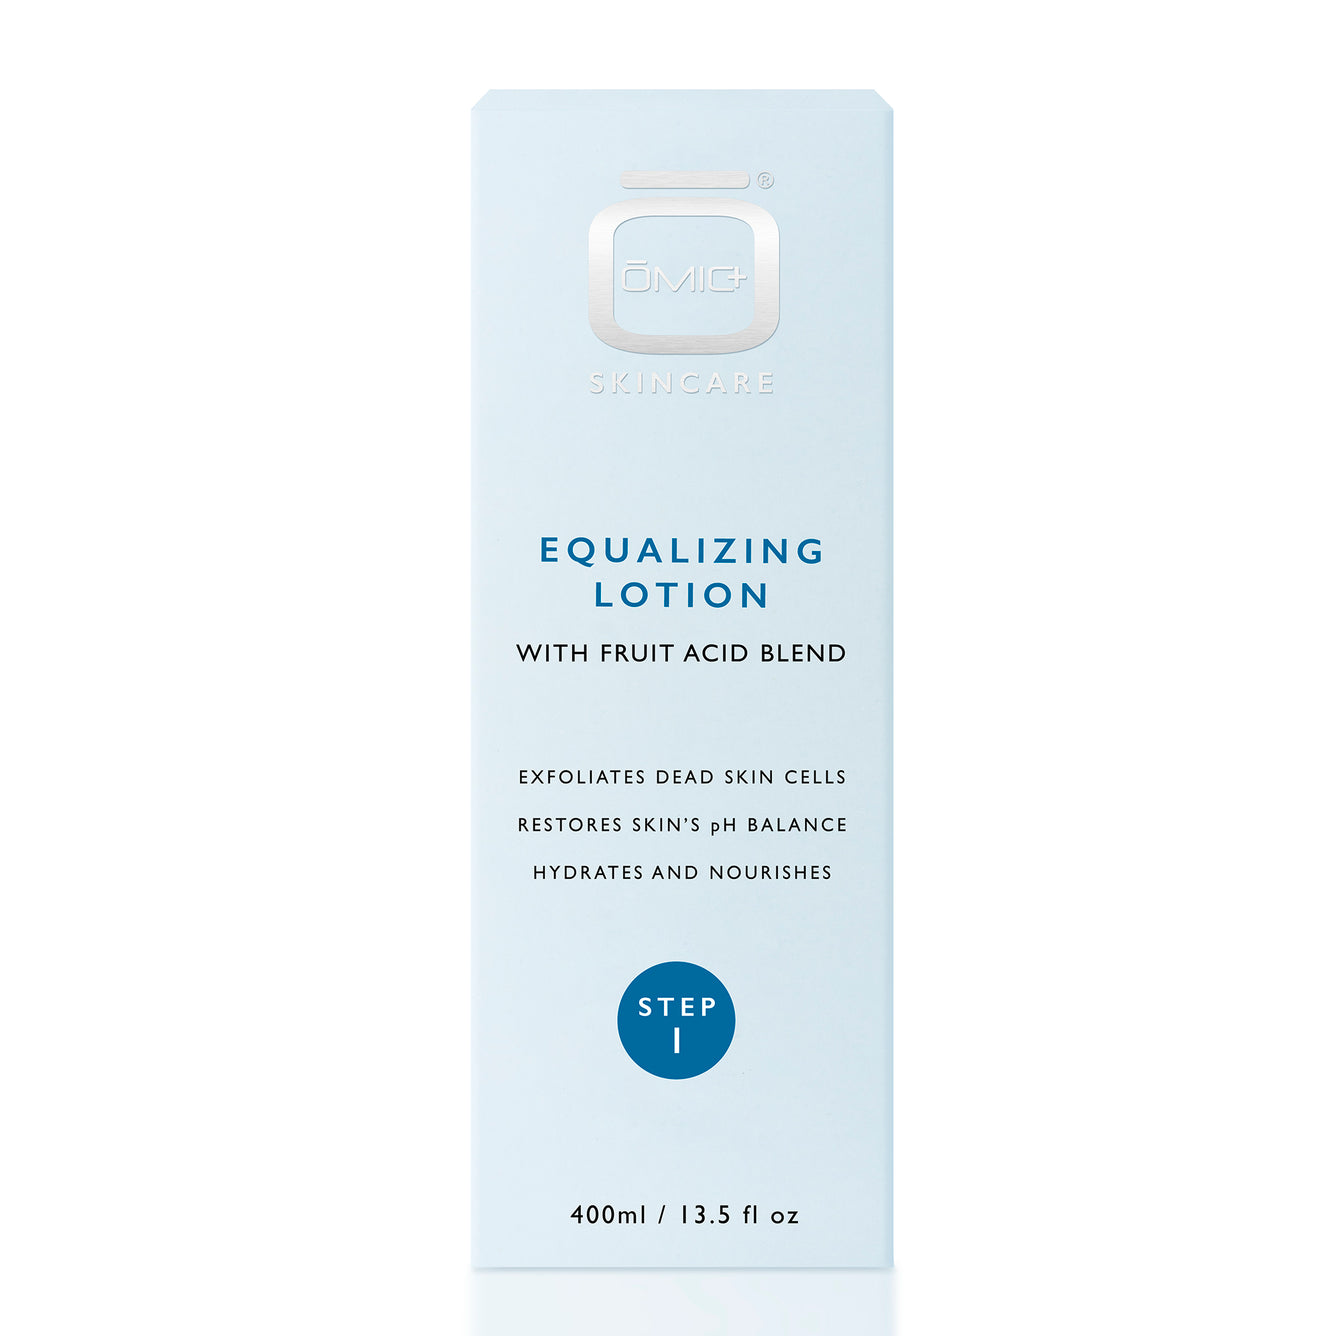 Omic+ Equilizing lotion -400ml - Step 1 Mitchell Brands - Mitchell Brands - Skin Lightening, Skin Brightening, Fade Dark Spots, Shea Butter, Hair Growth Products